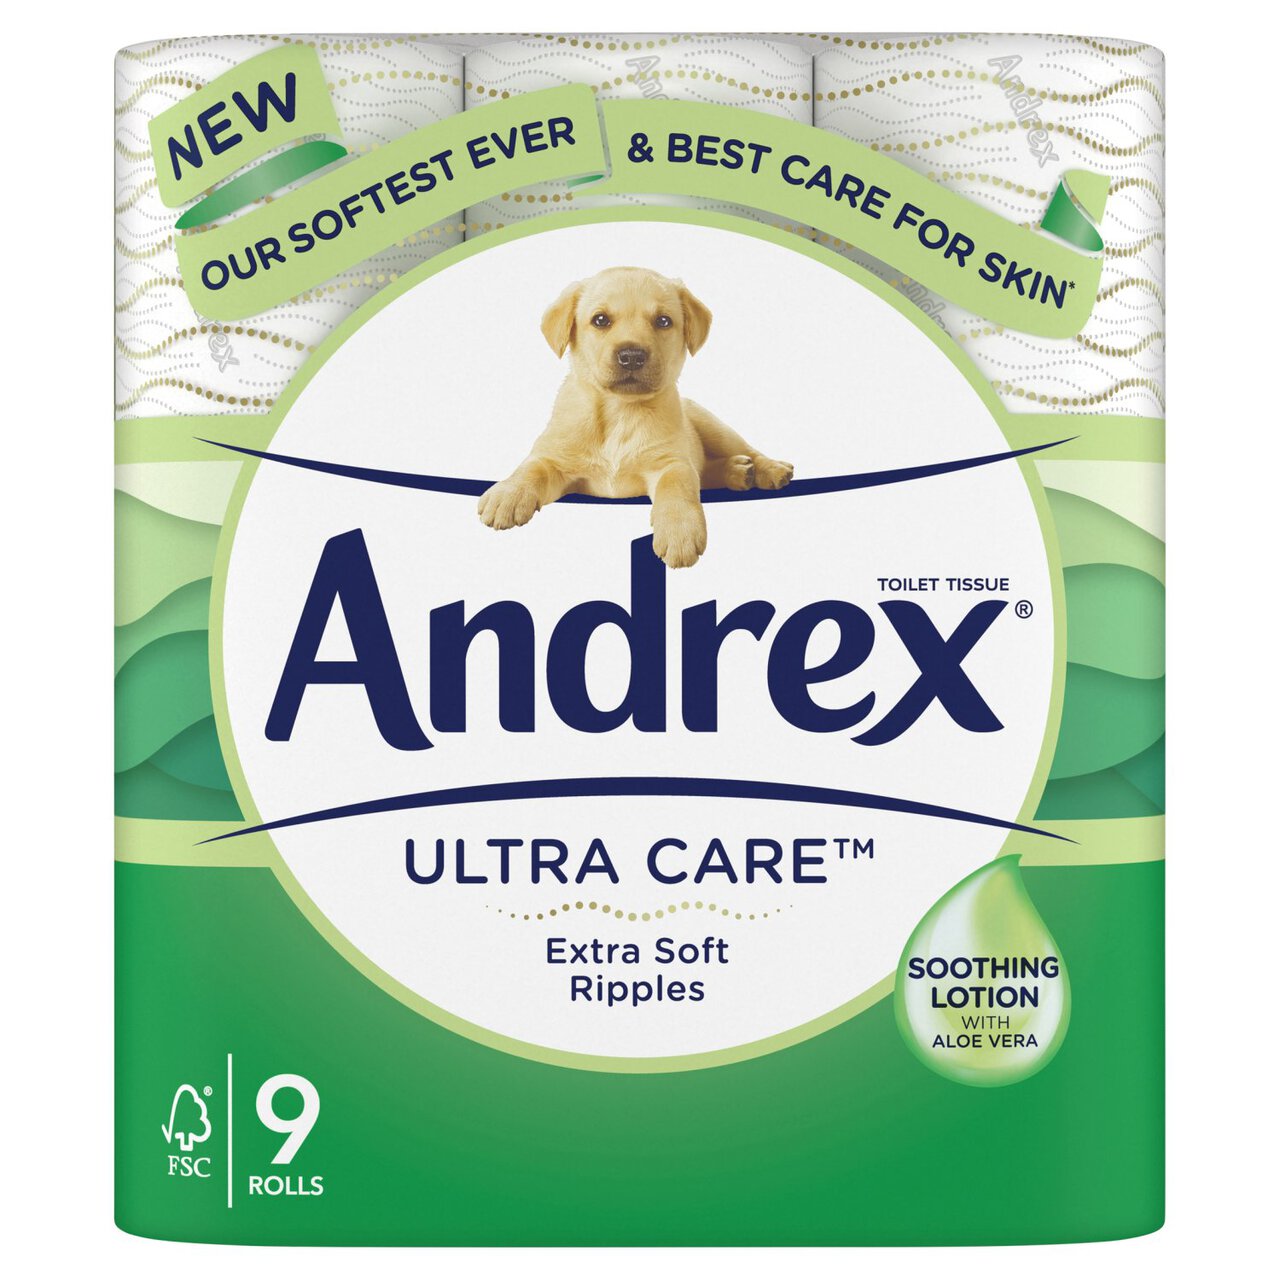 Andrex Ultra Care Toilet Roll 9 per pack